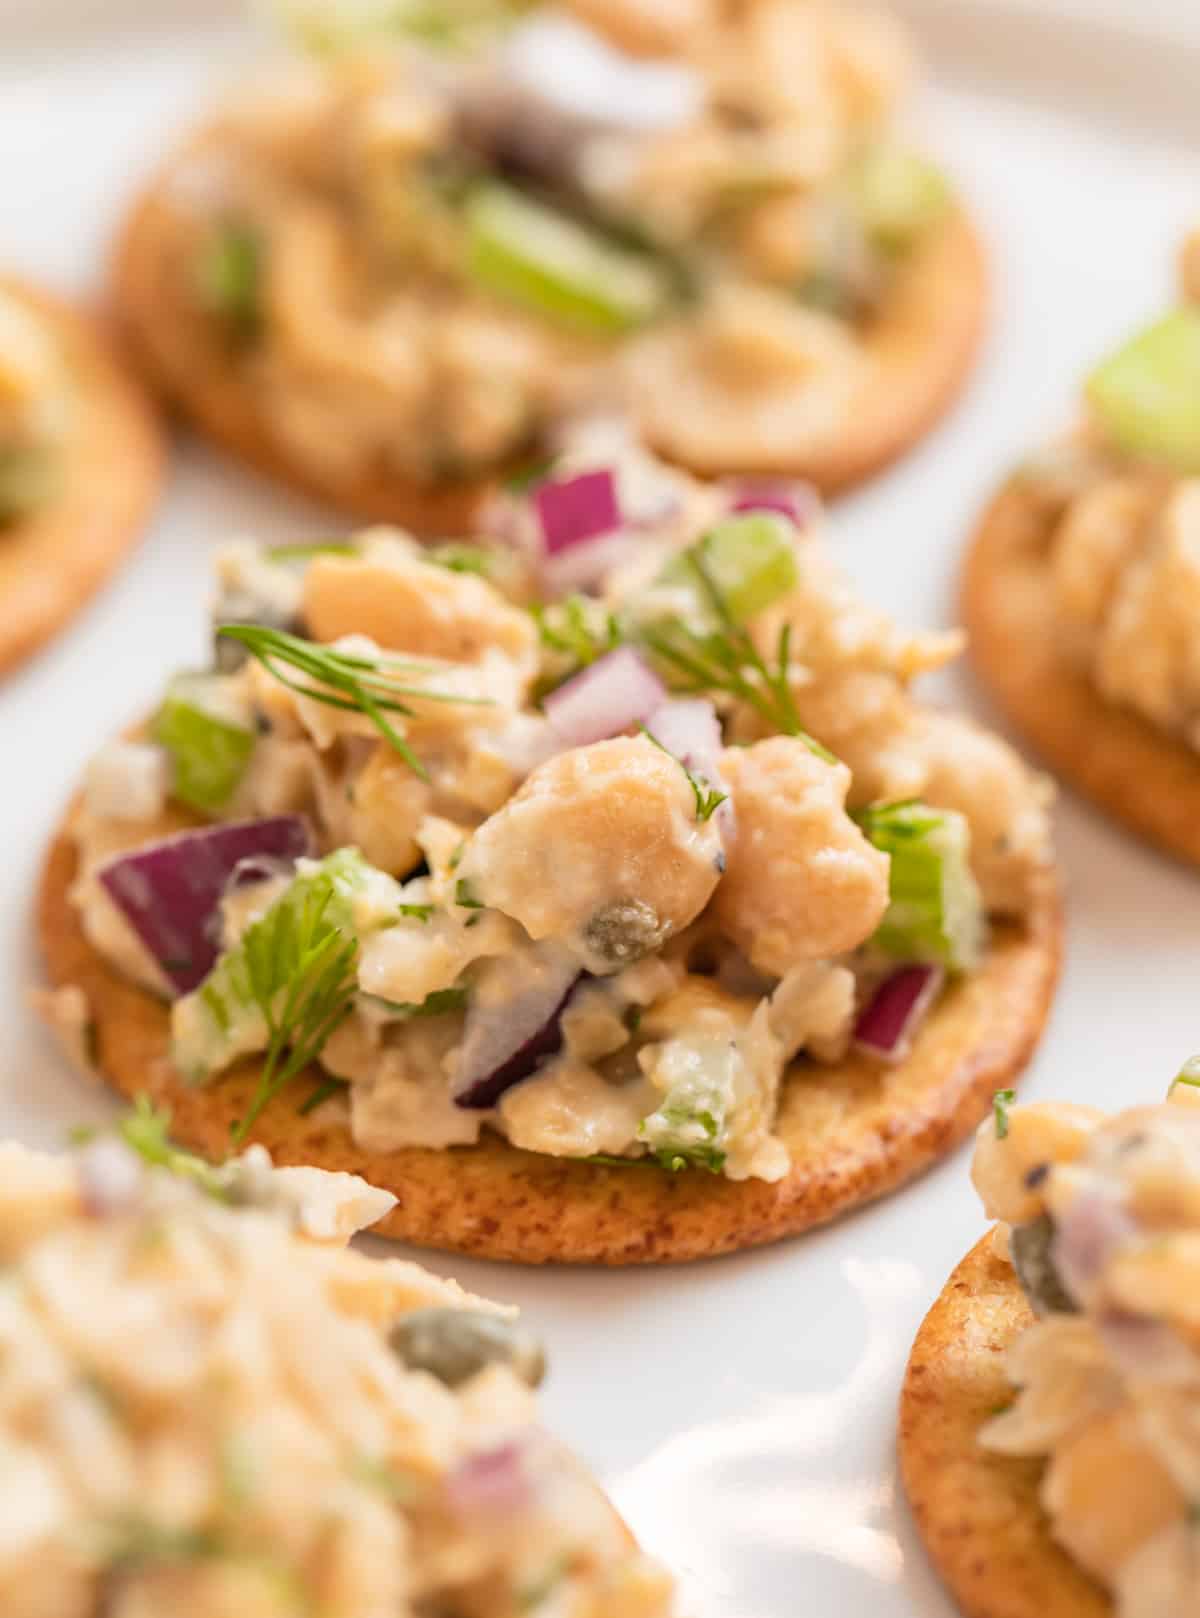 Crackers lined on white plate with vegan tuna on top.